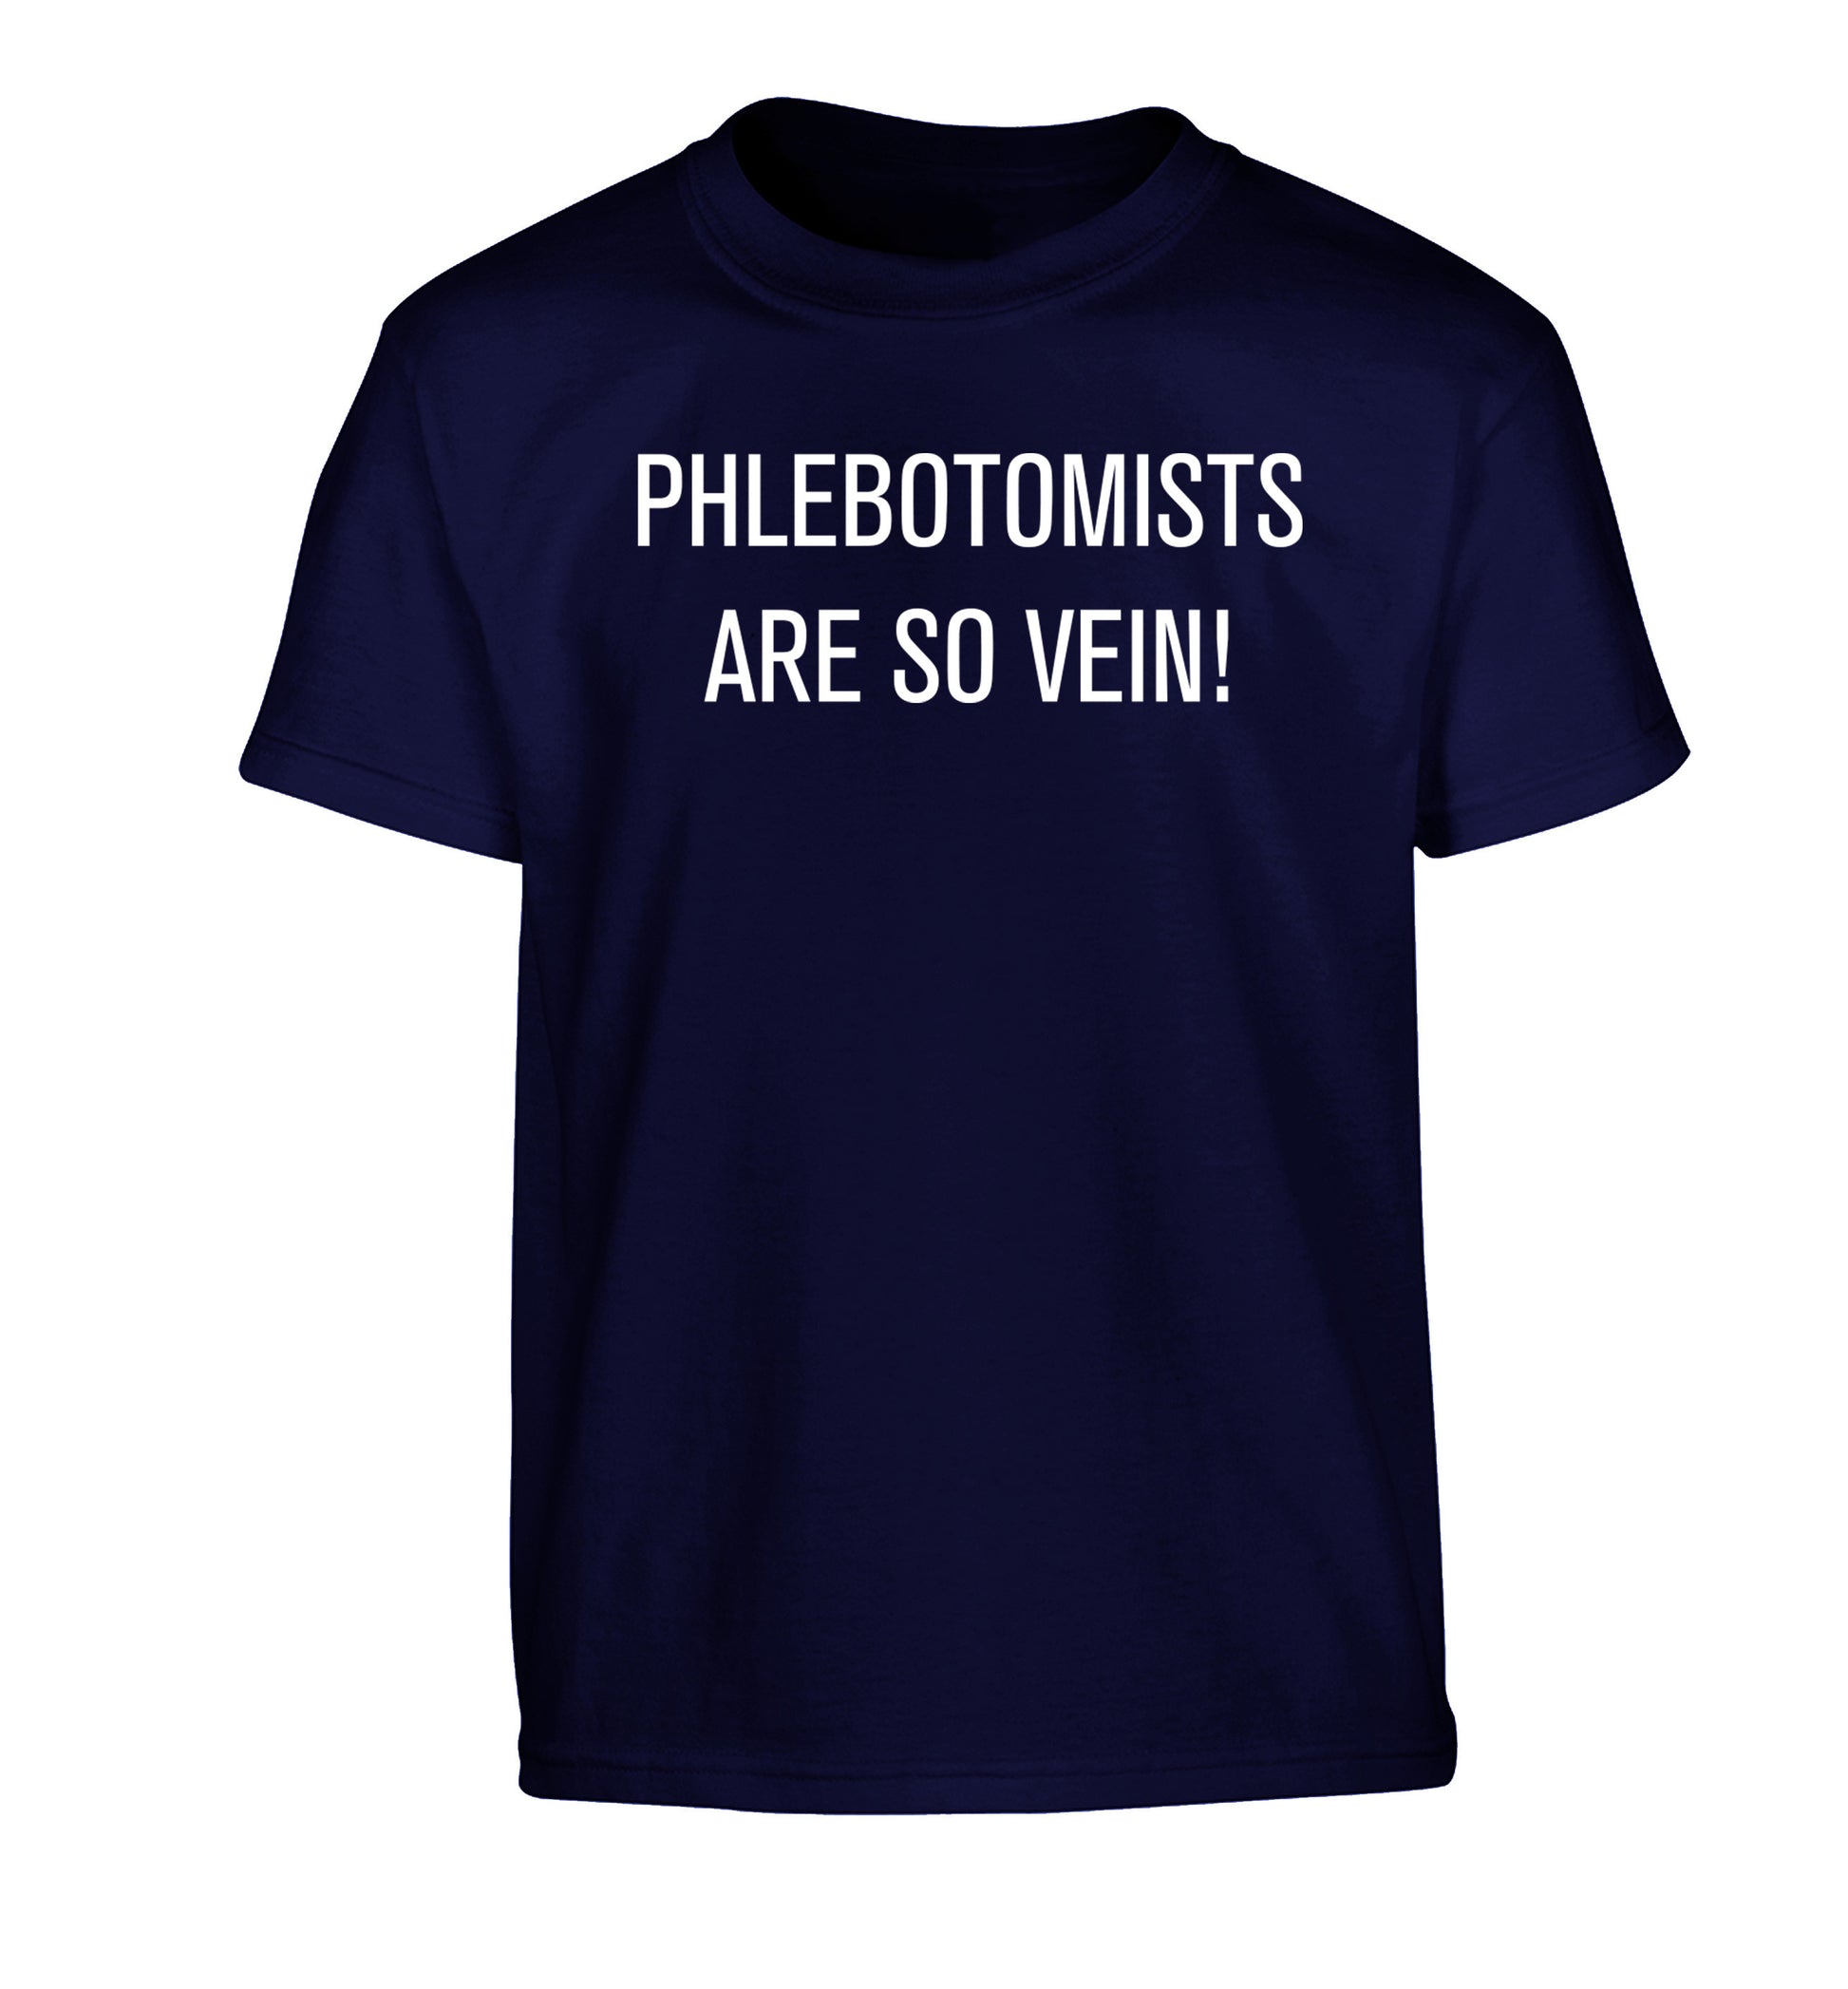 Phlebotomists are so vein! Children's navy Tshirt 12-14 Years